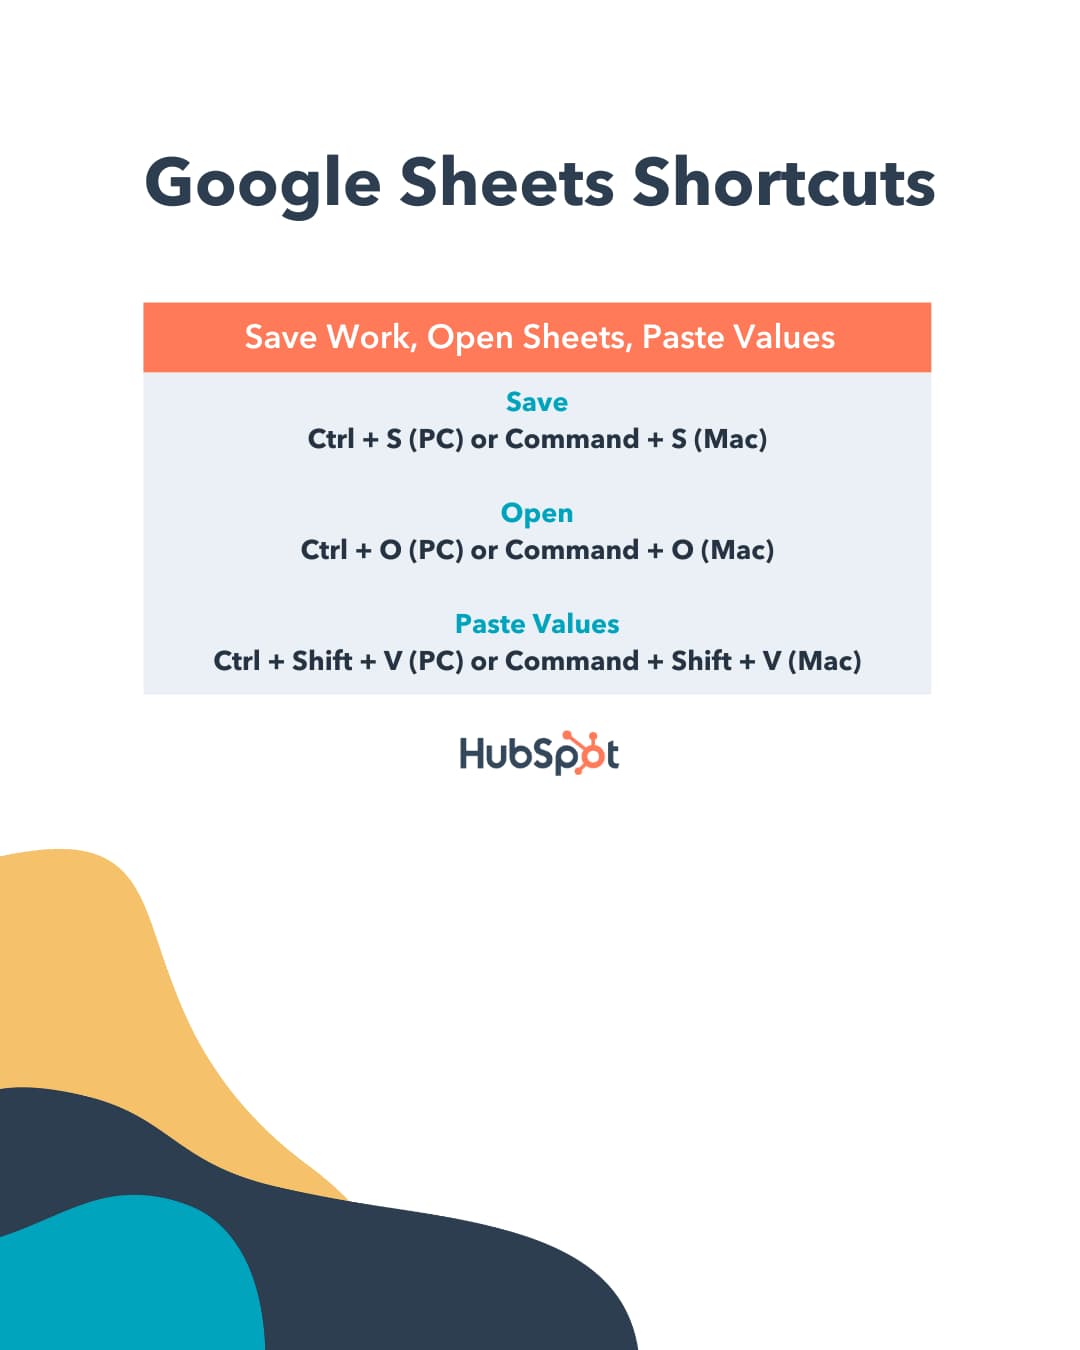 Save work, open sheets, and paste values ​​with Google Sheets shortcuts